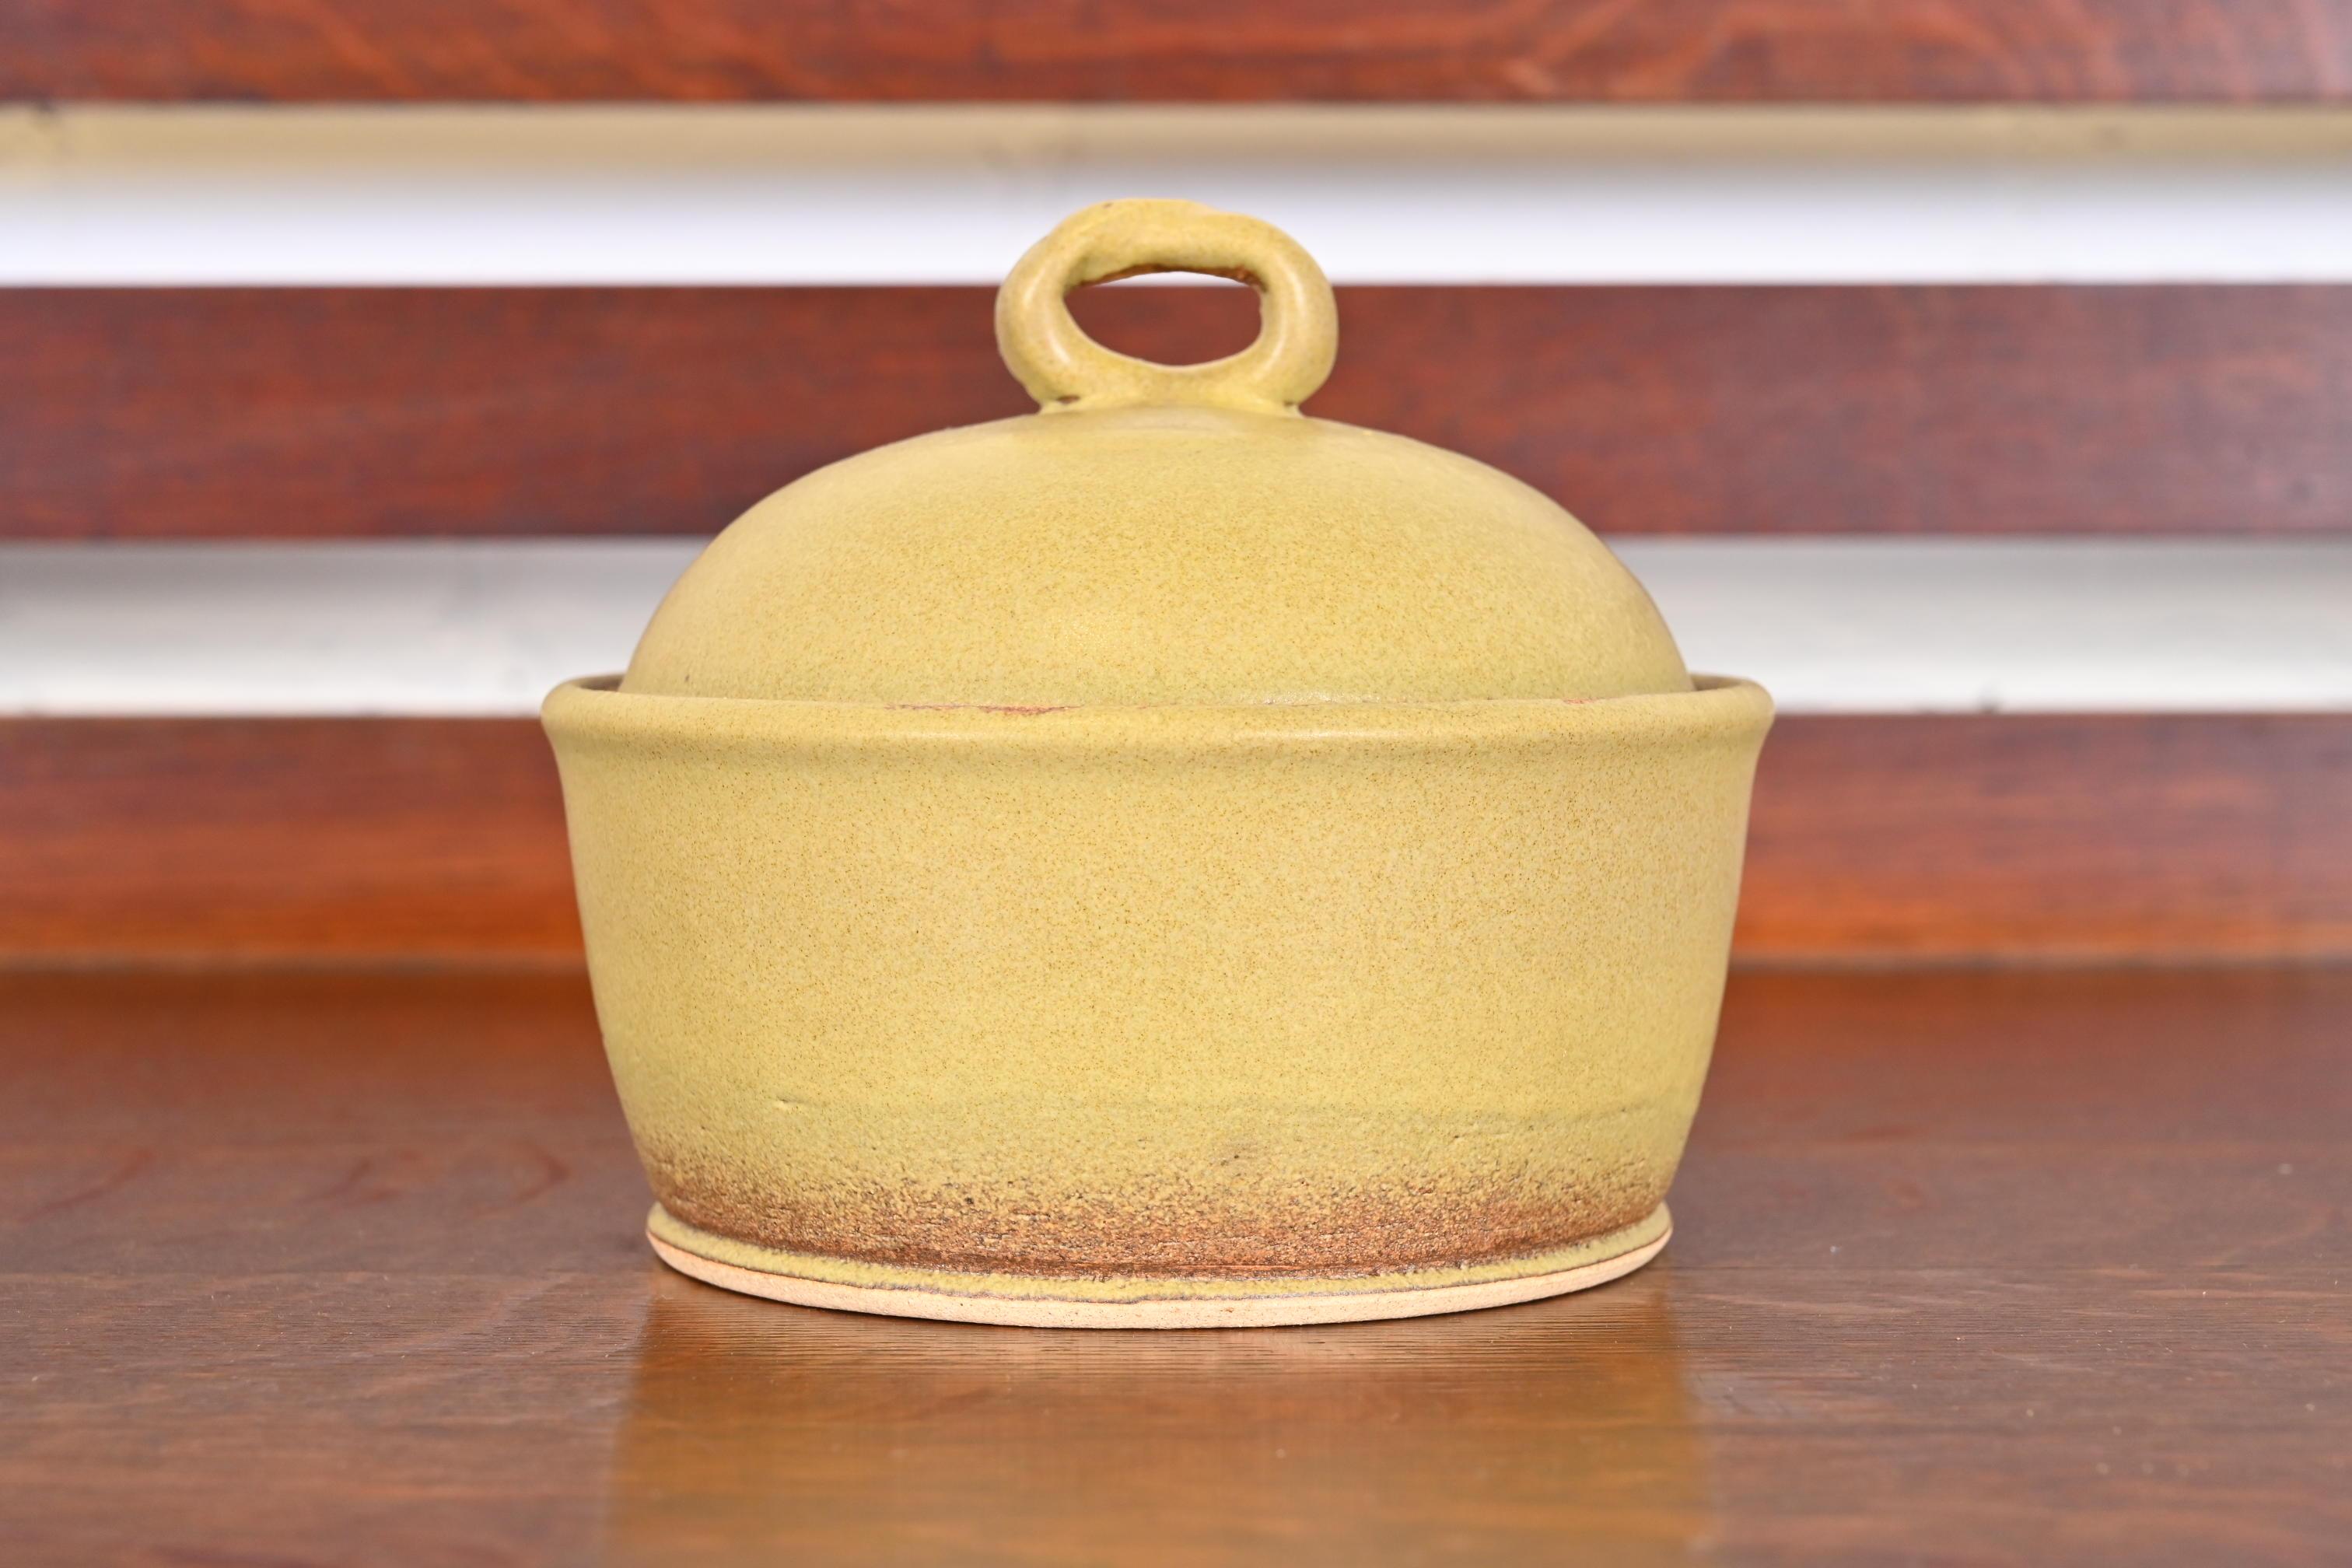 American Studio Pottery Glazed Bowl with Lid